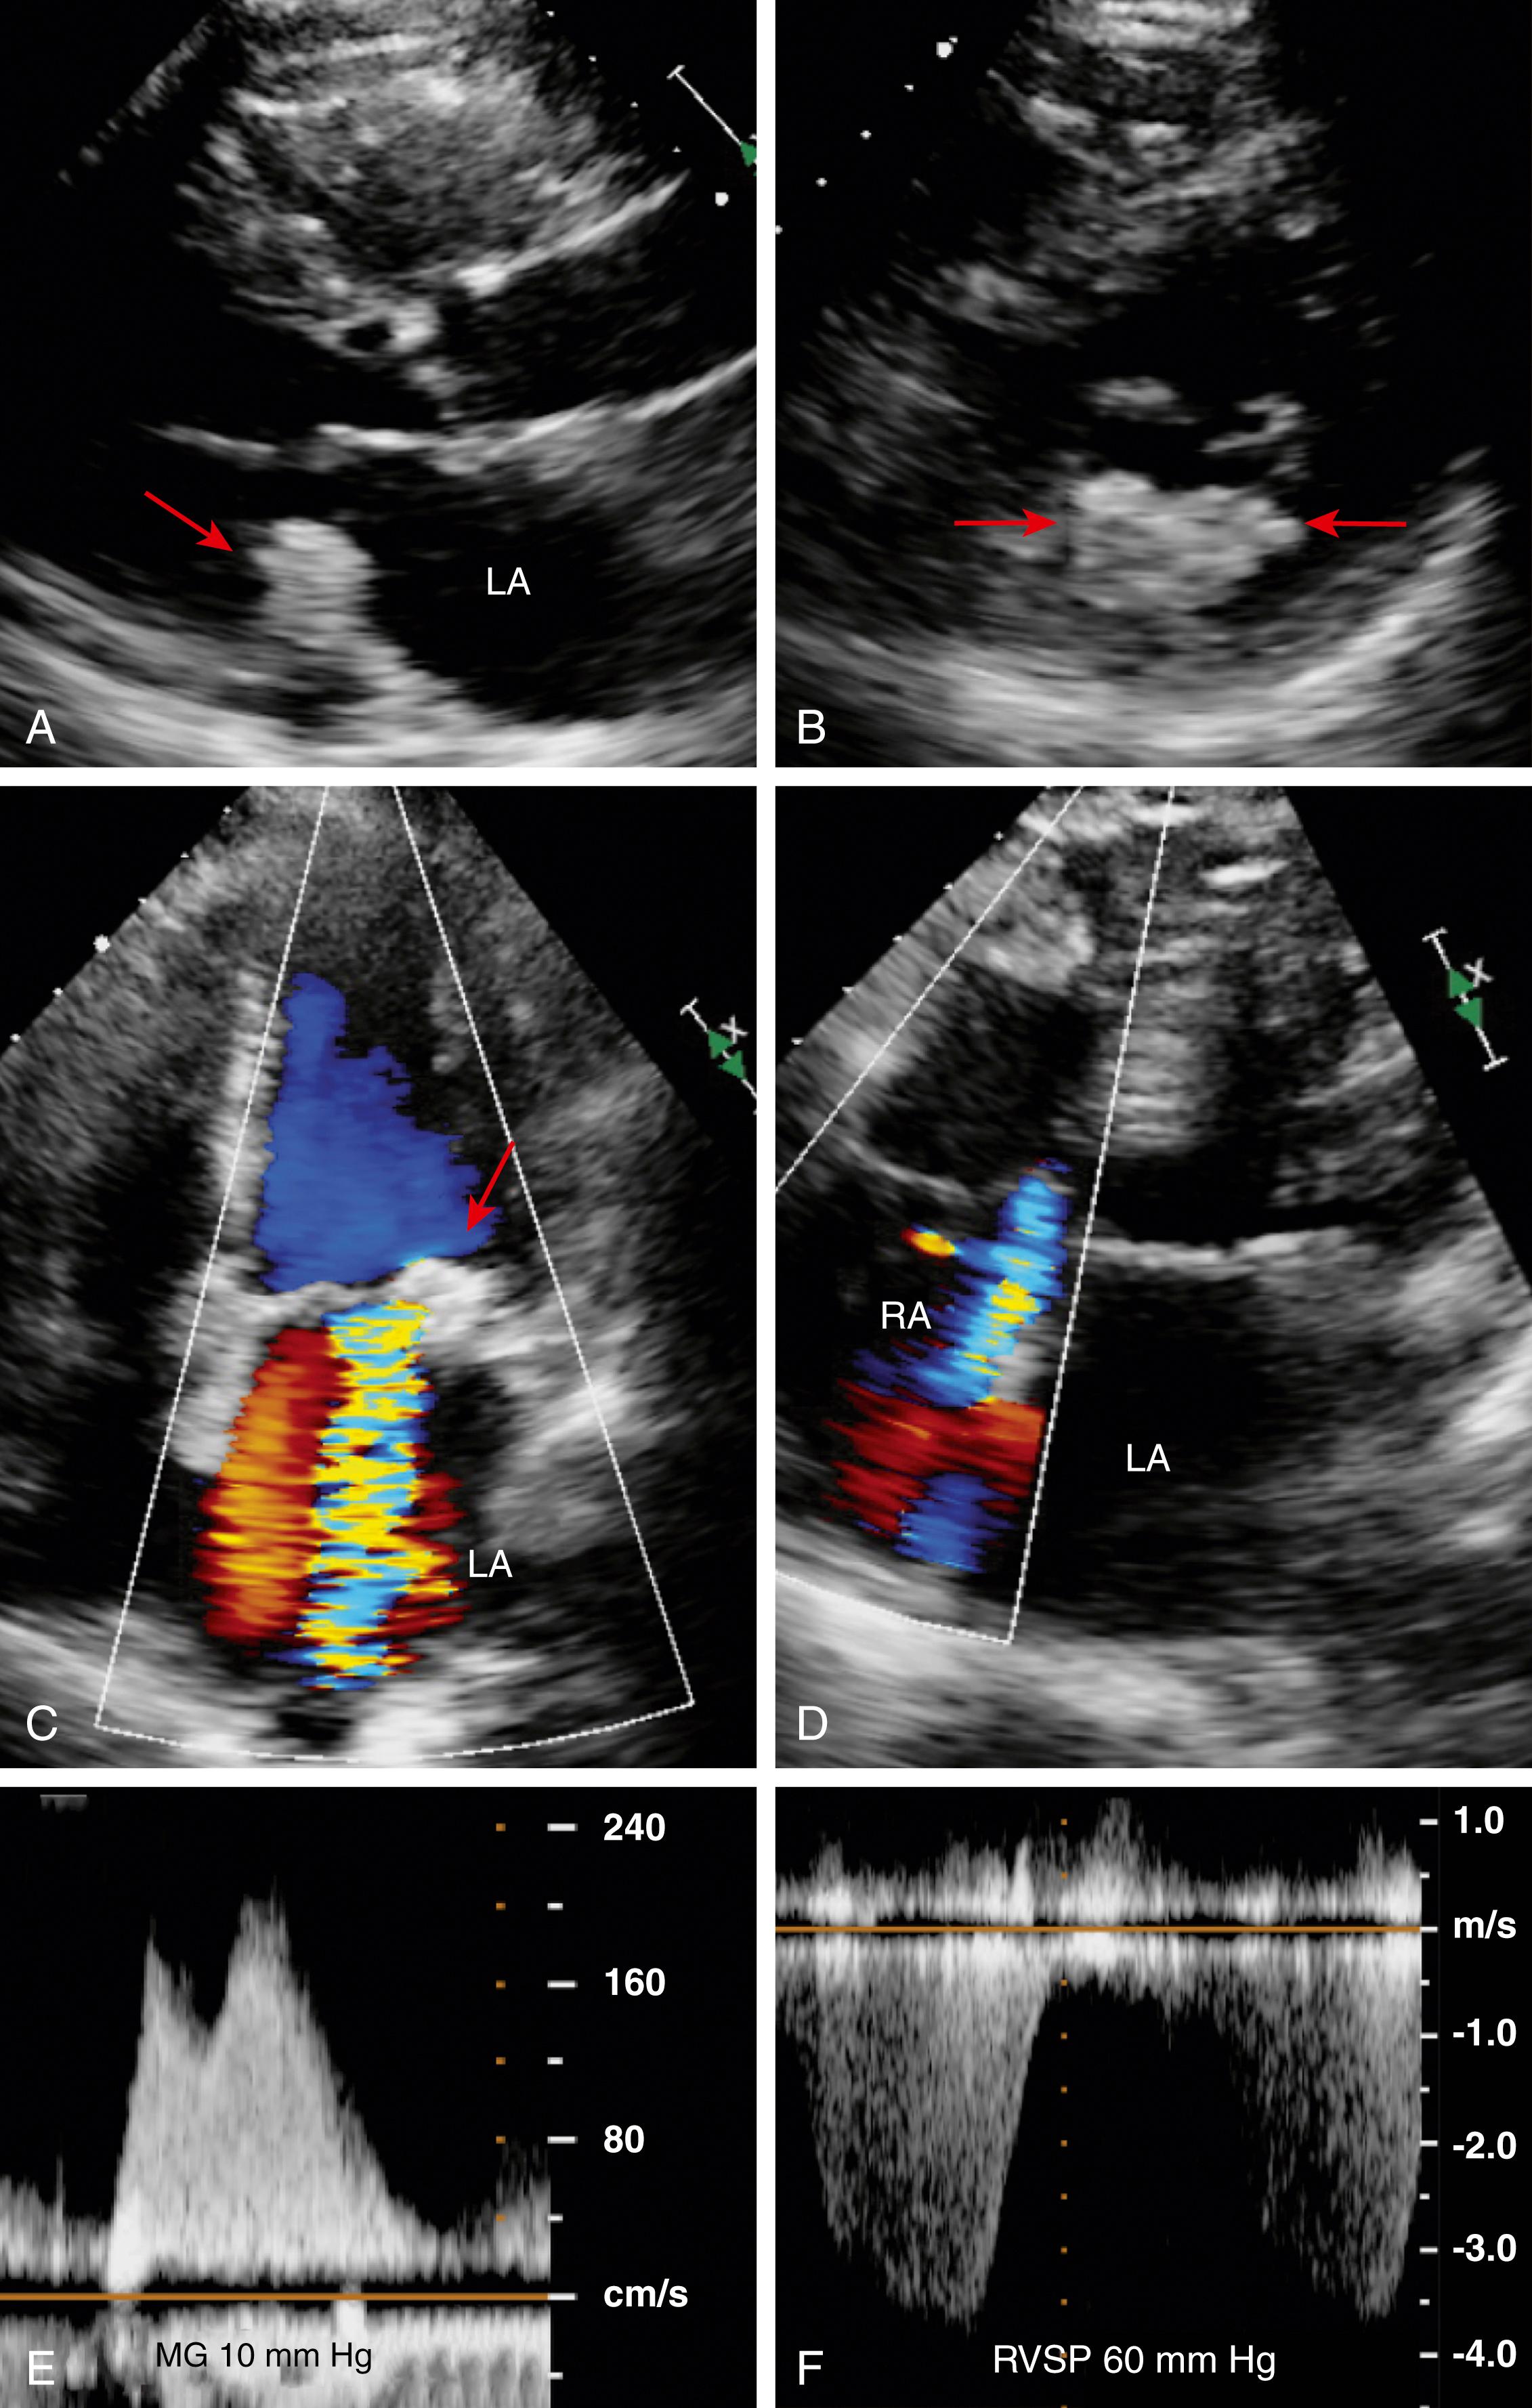 Figure 165.1, Degenerative or calcific mitral stenosis. A, Parasternal long-axis view of the left ventricle (LV) with severe calcification of the mitral annulus (red arrow) . Note the enlarged left atrium. B, Parasternal short-axis of the LV. Note the dense and extensive calcification of the posterior mitral annulus (red arrows). C, Apical four-chamber view illustrates the dense calcification of the mitral anulus (red arrow) and the presence of associated moderate mitral regurgitation. D, Another apical four-chamber view illustrates the presence of associated tricuspid regurgitation. E, The presence of a mean transmitral gradient of 10 mm Hg is noted, and the associated pulmonary hypertension is documented F . RA, Right atrium; RVSP, right ventricular systolic pressure.